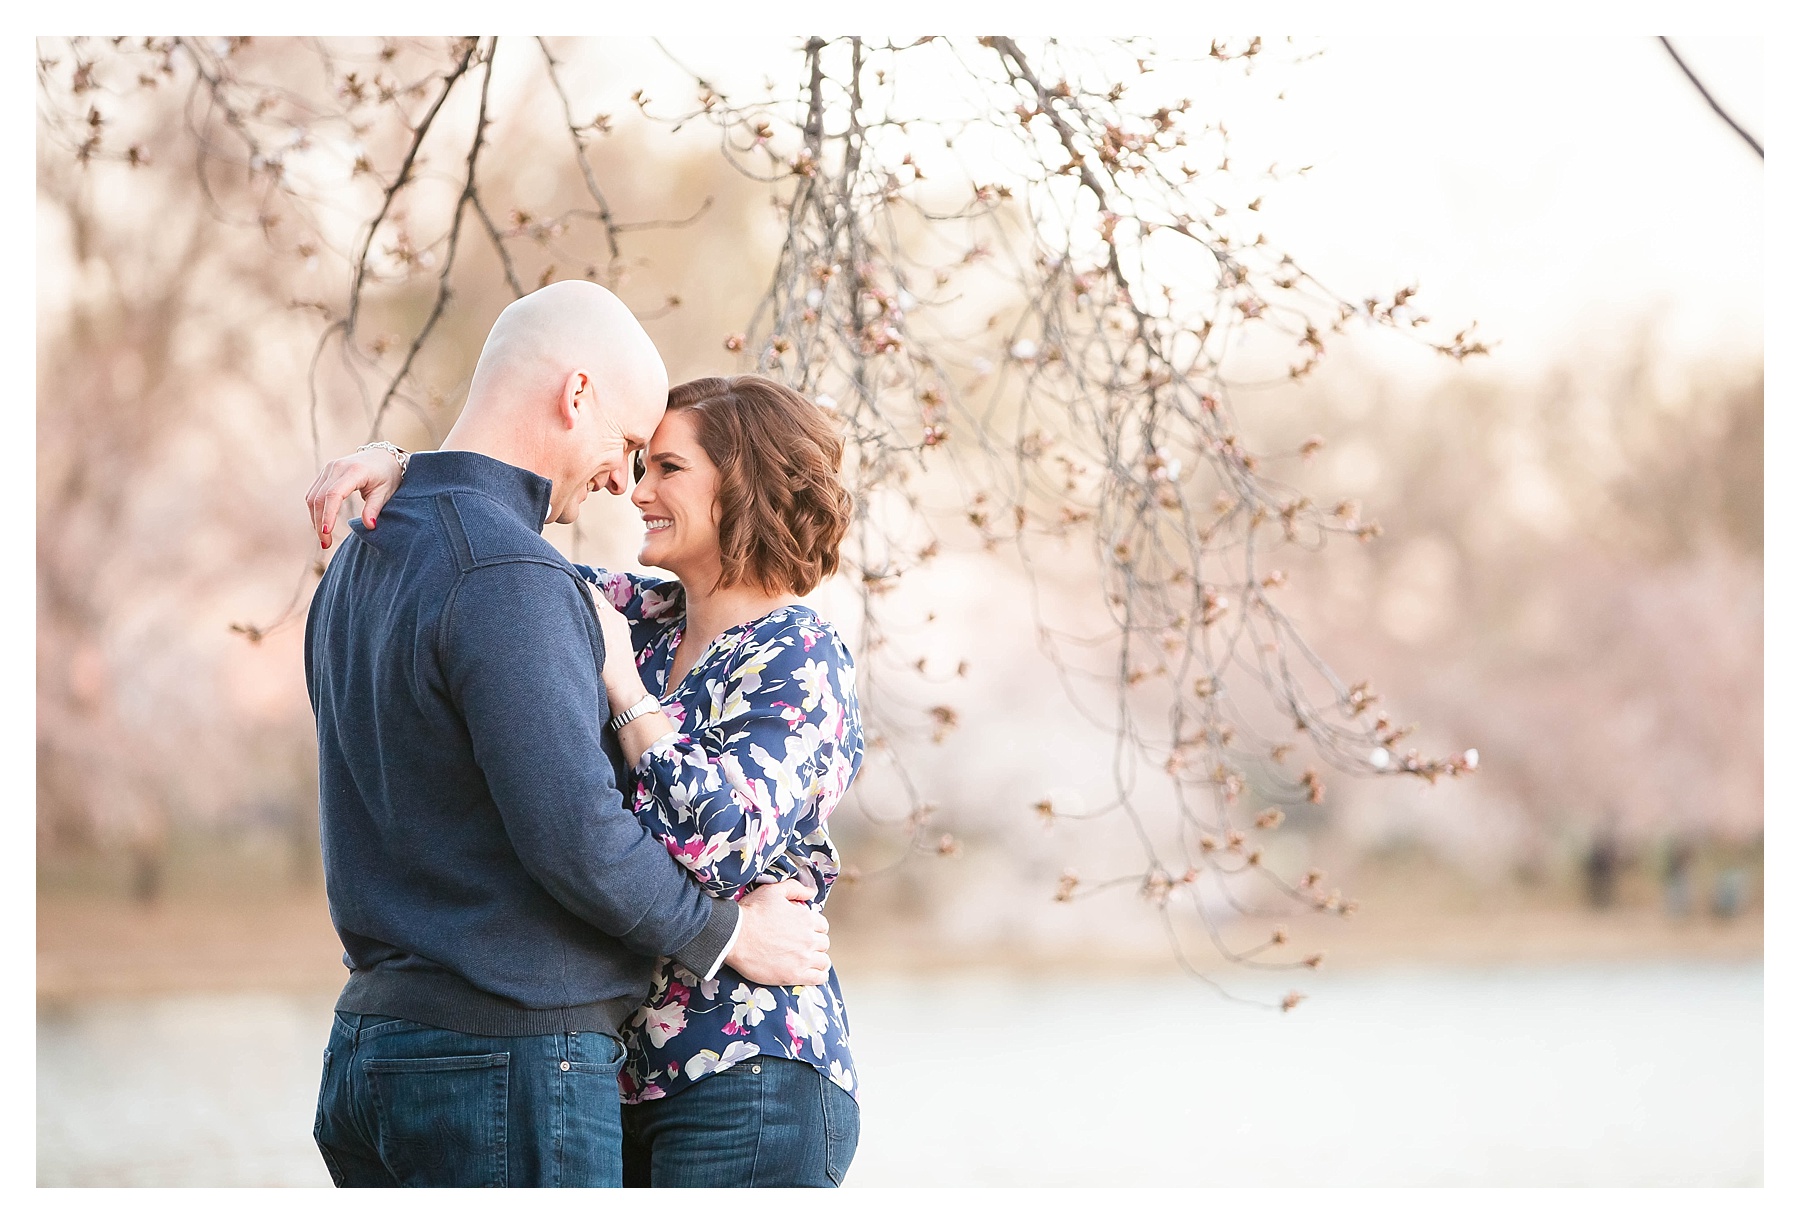 Candice Adelle Photography DC Destination Wedding Photographer Cherry Blossom Engagment Session_0006.jpg